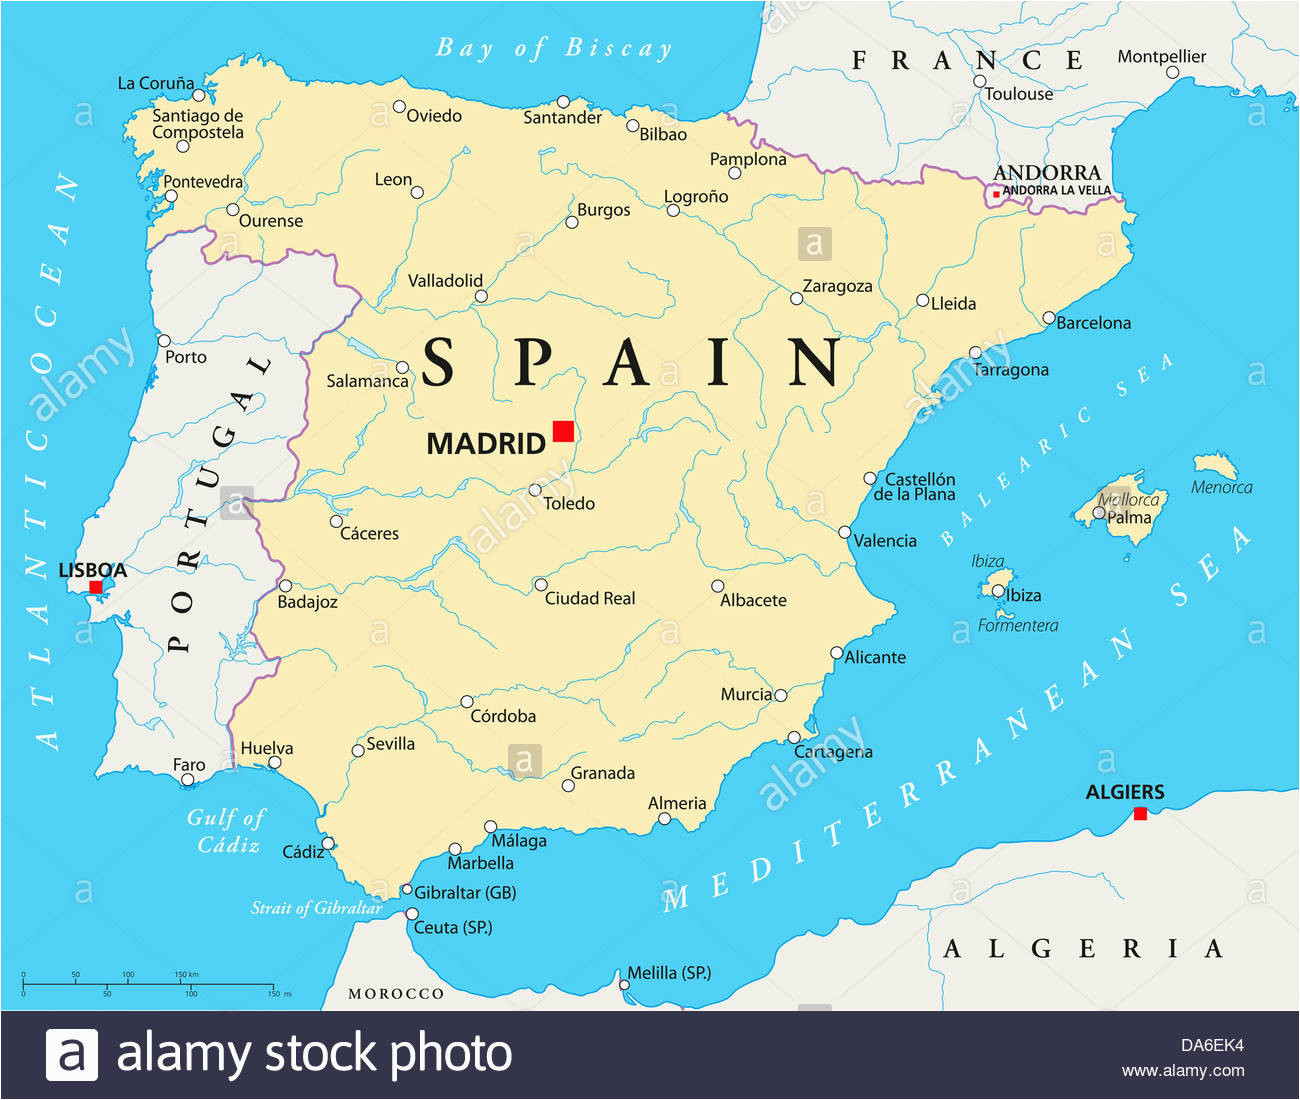 spain map stock photos spain map stock images alamy